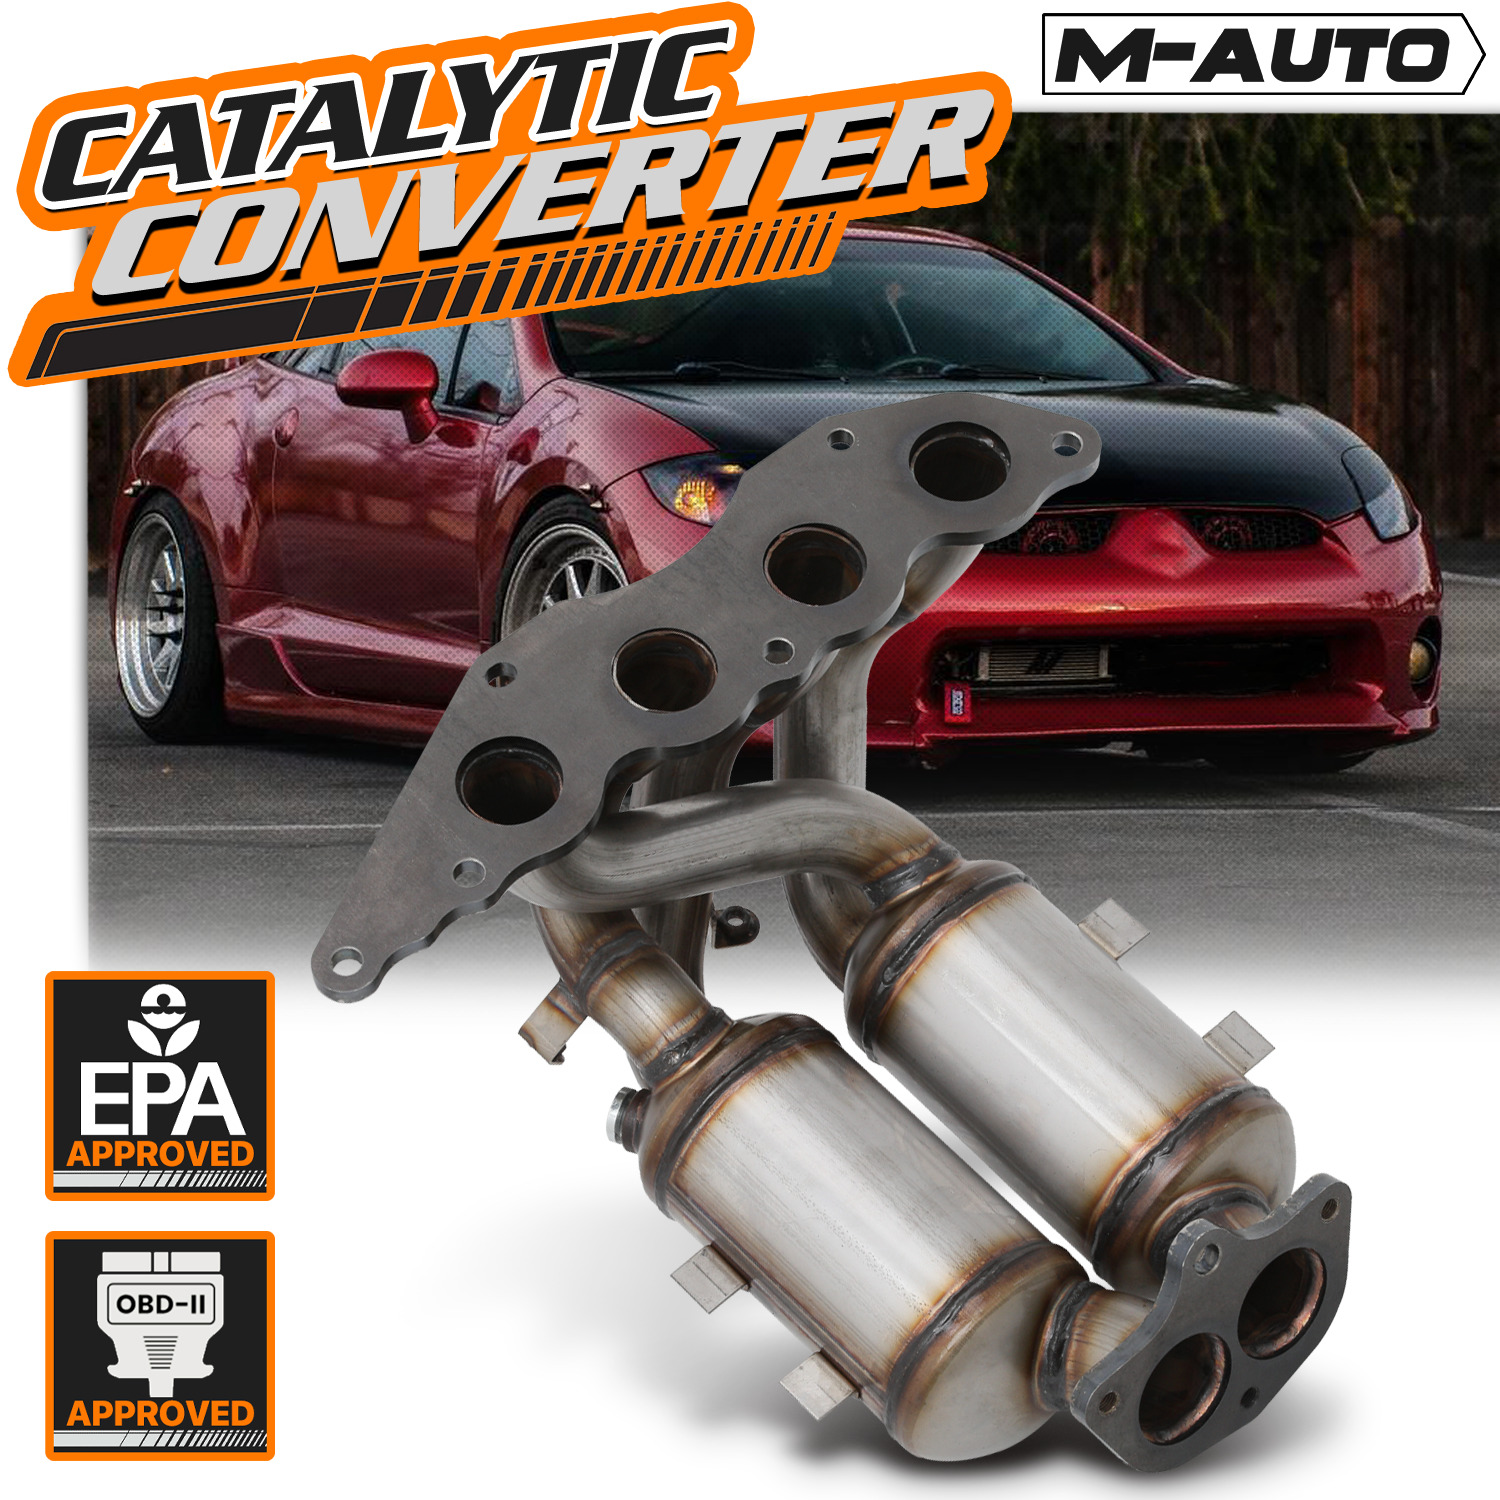 Catalytic Converter Exhaust Header Manifold For 2006-2012 Mitsubishi Eclipse 2.4